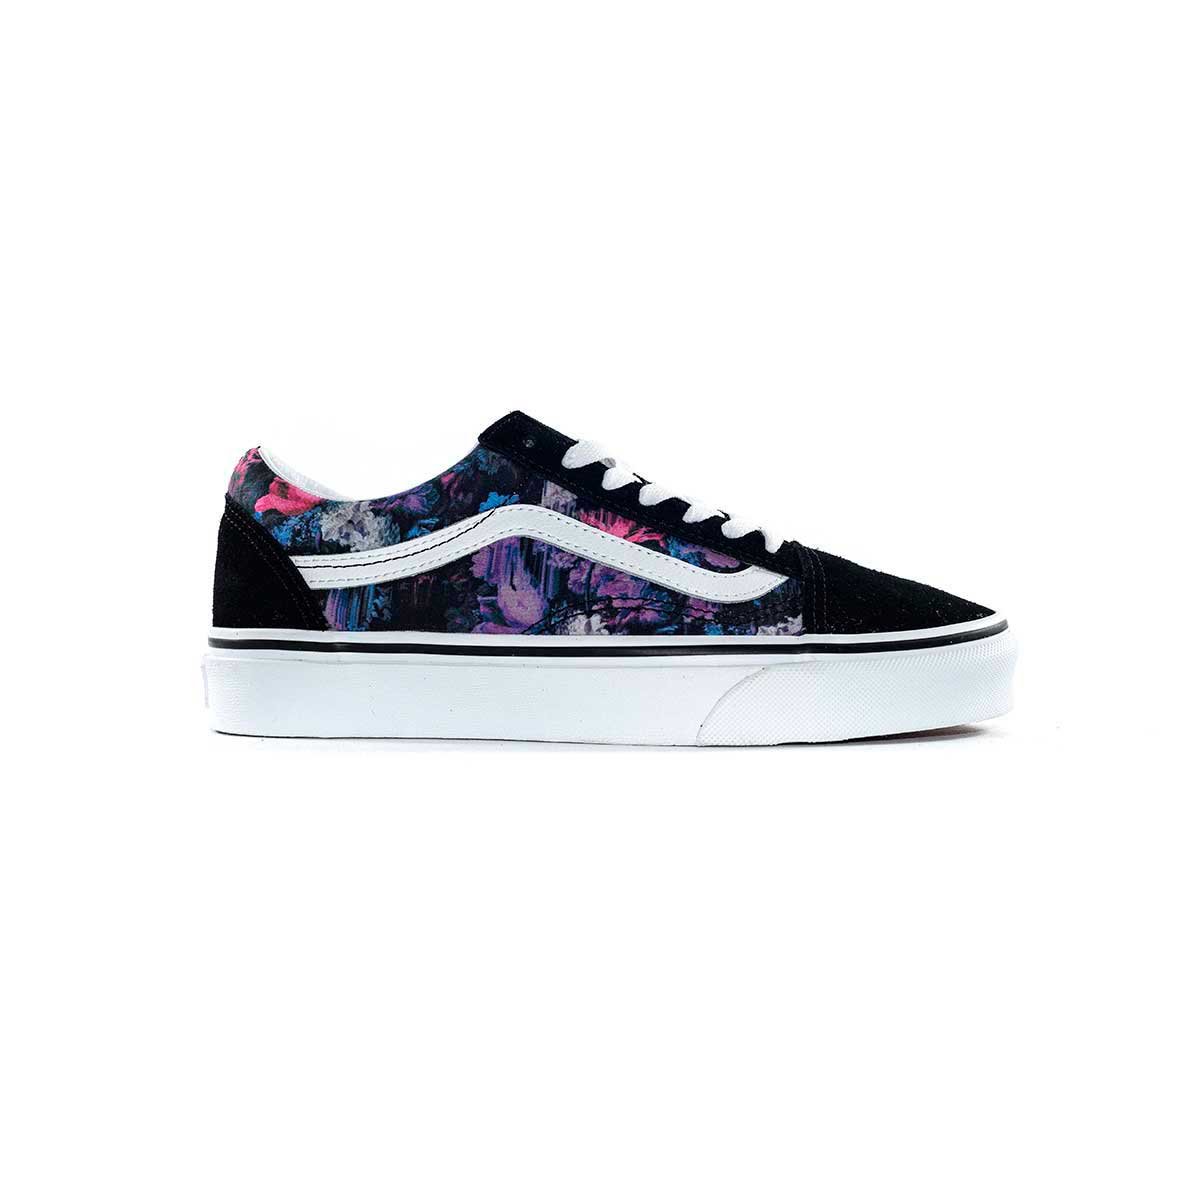 Take - vans dama - 60% off for All Orders - Enjoy free home delivery  service - inzentio.com